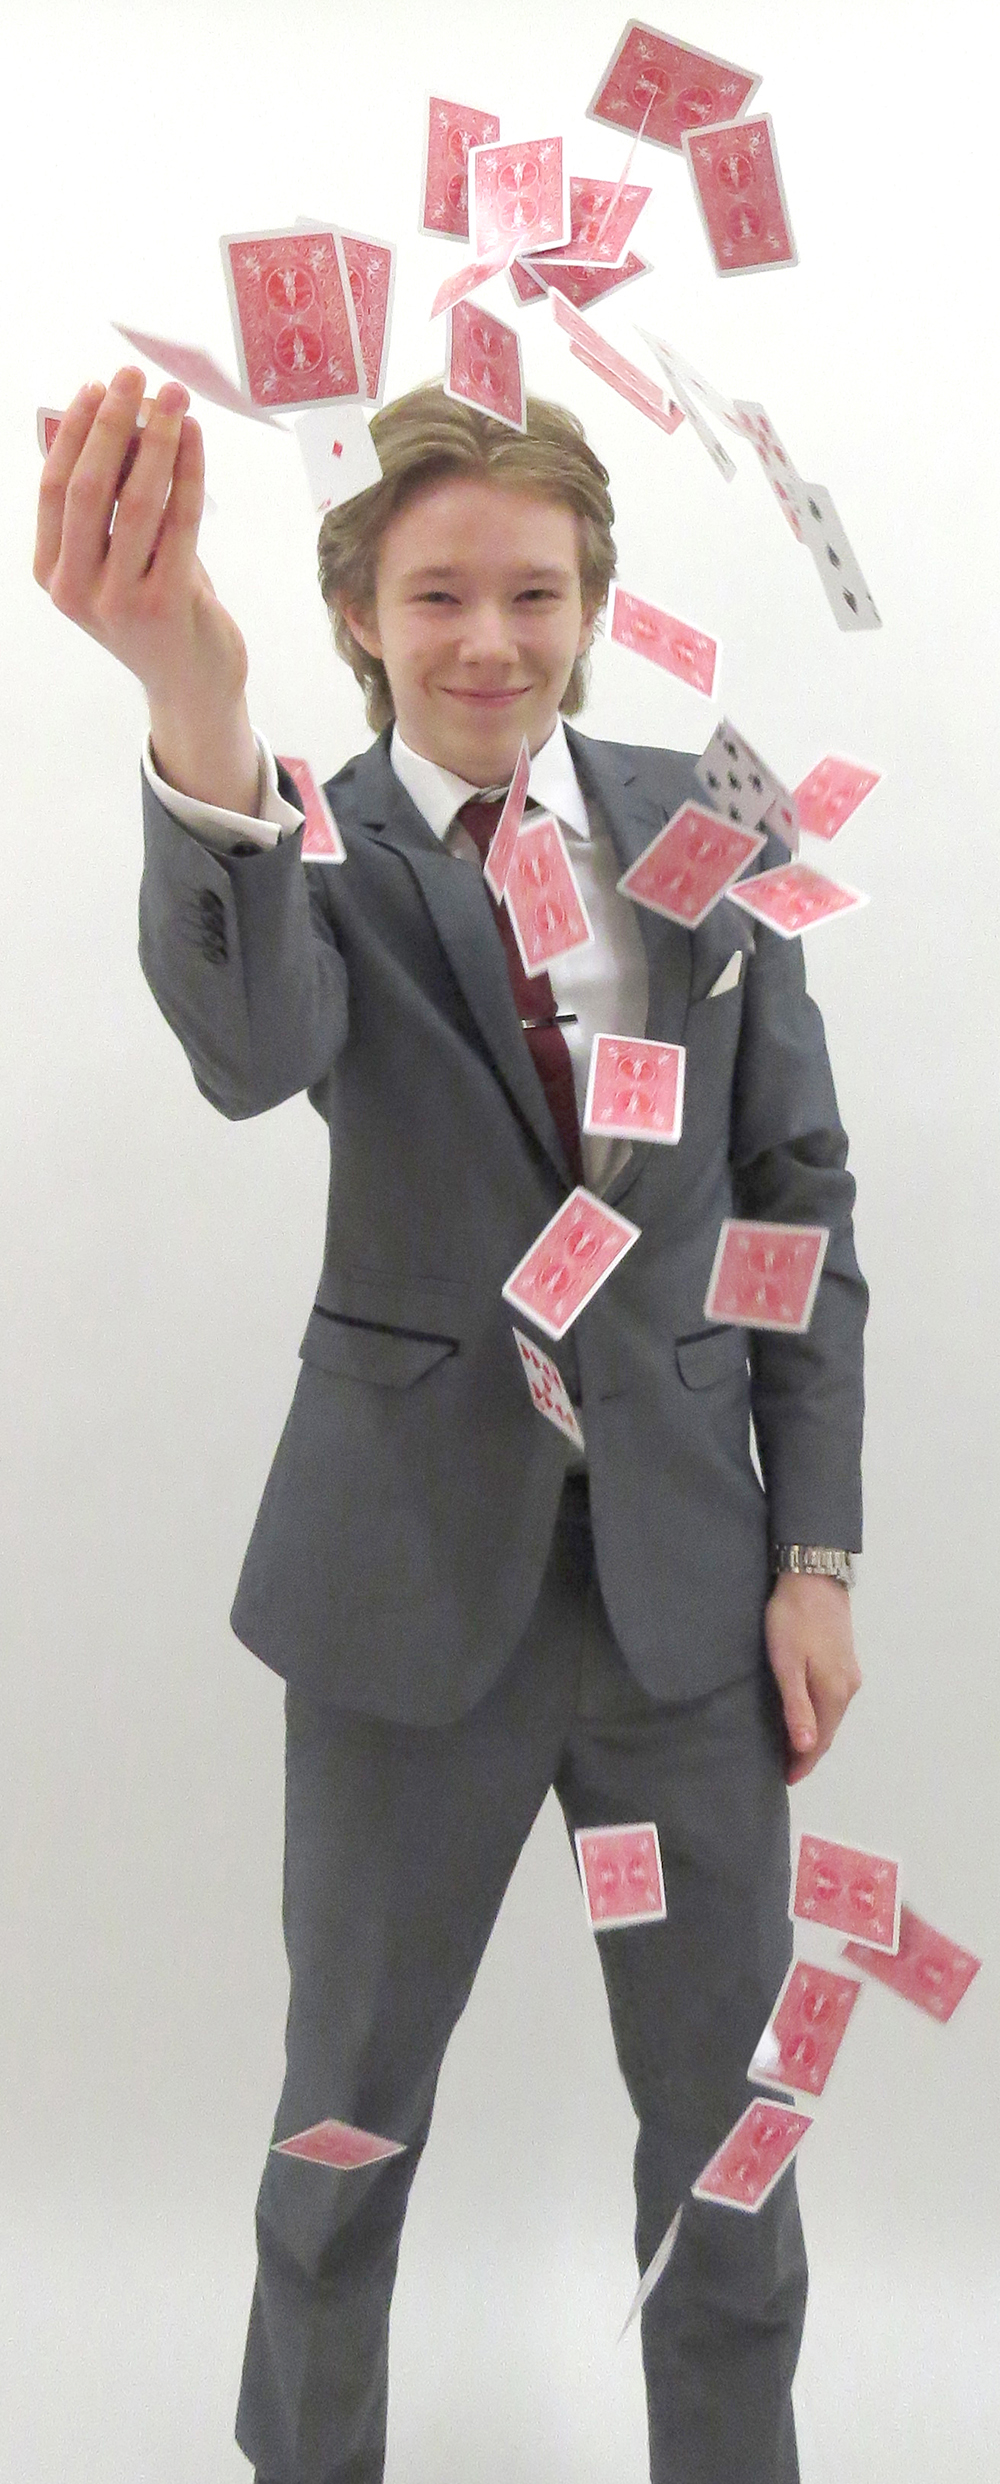 Local Magician Raising More Money For Charity